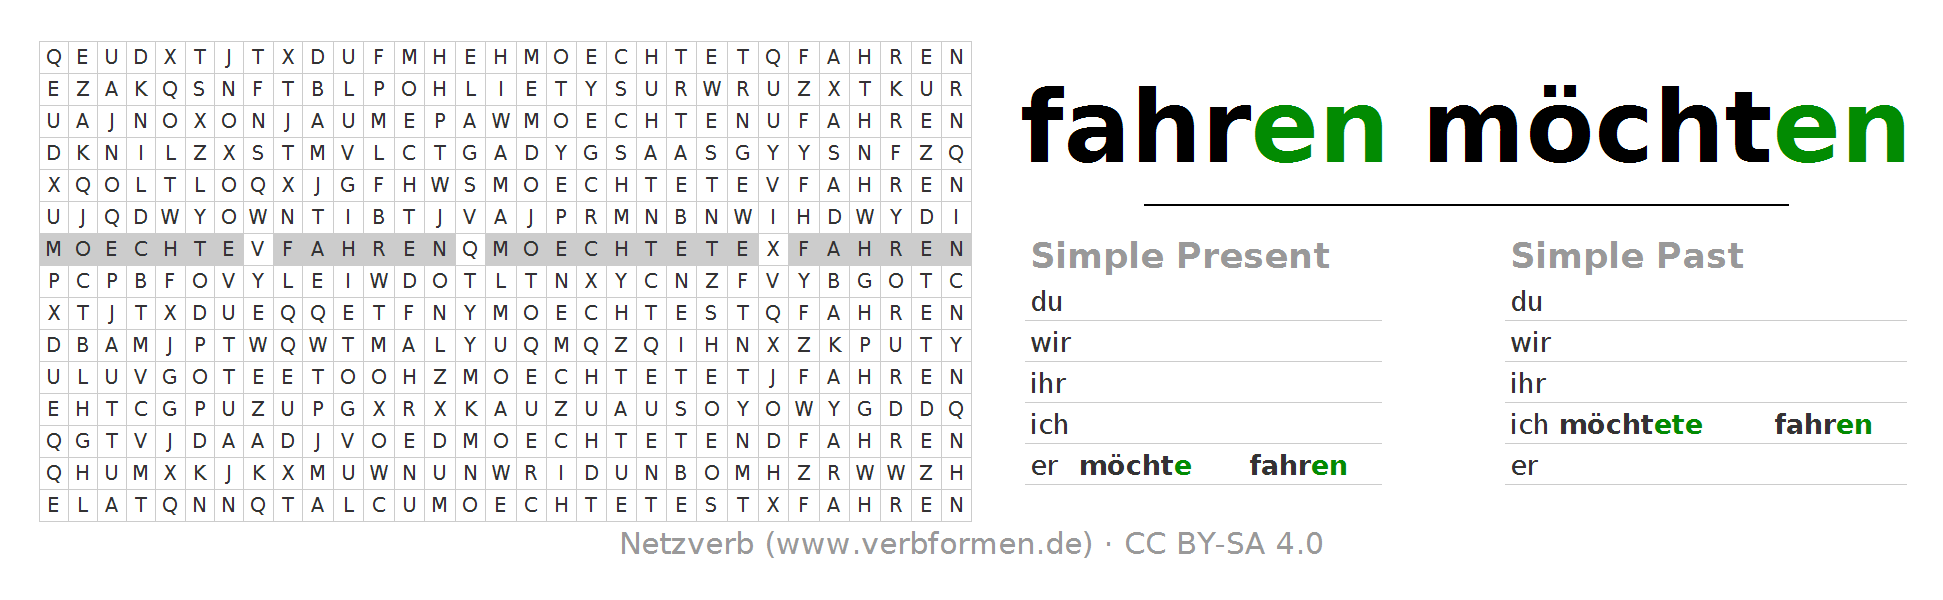 Word Search Puzzle For The Conjugation Of The Verb Möchte Fahren - Fahren, Transparent background PNG HD thumbnail